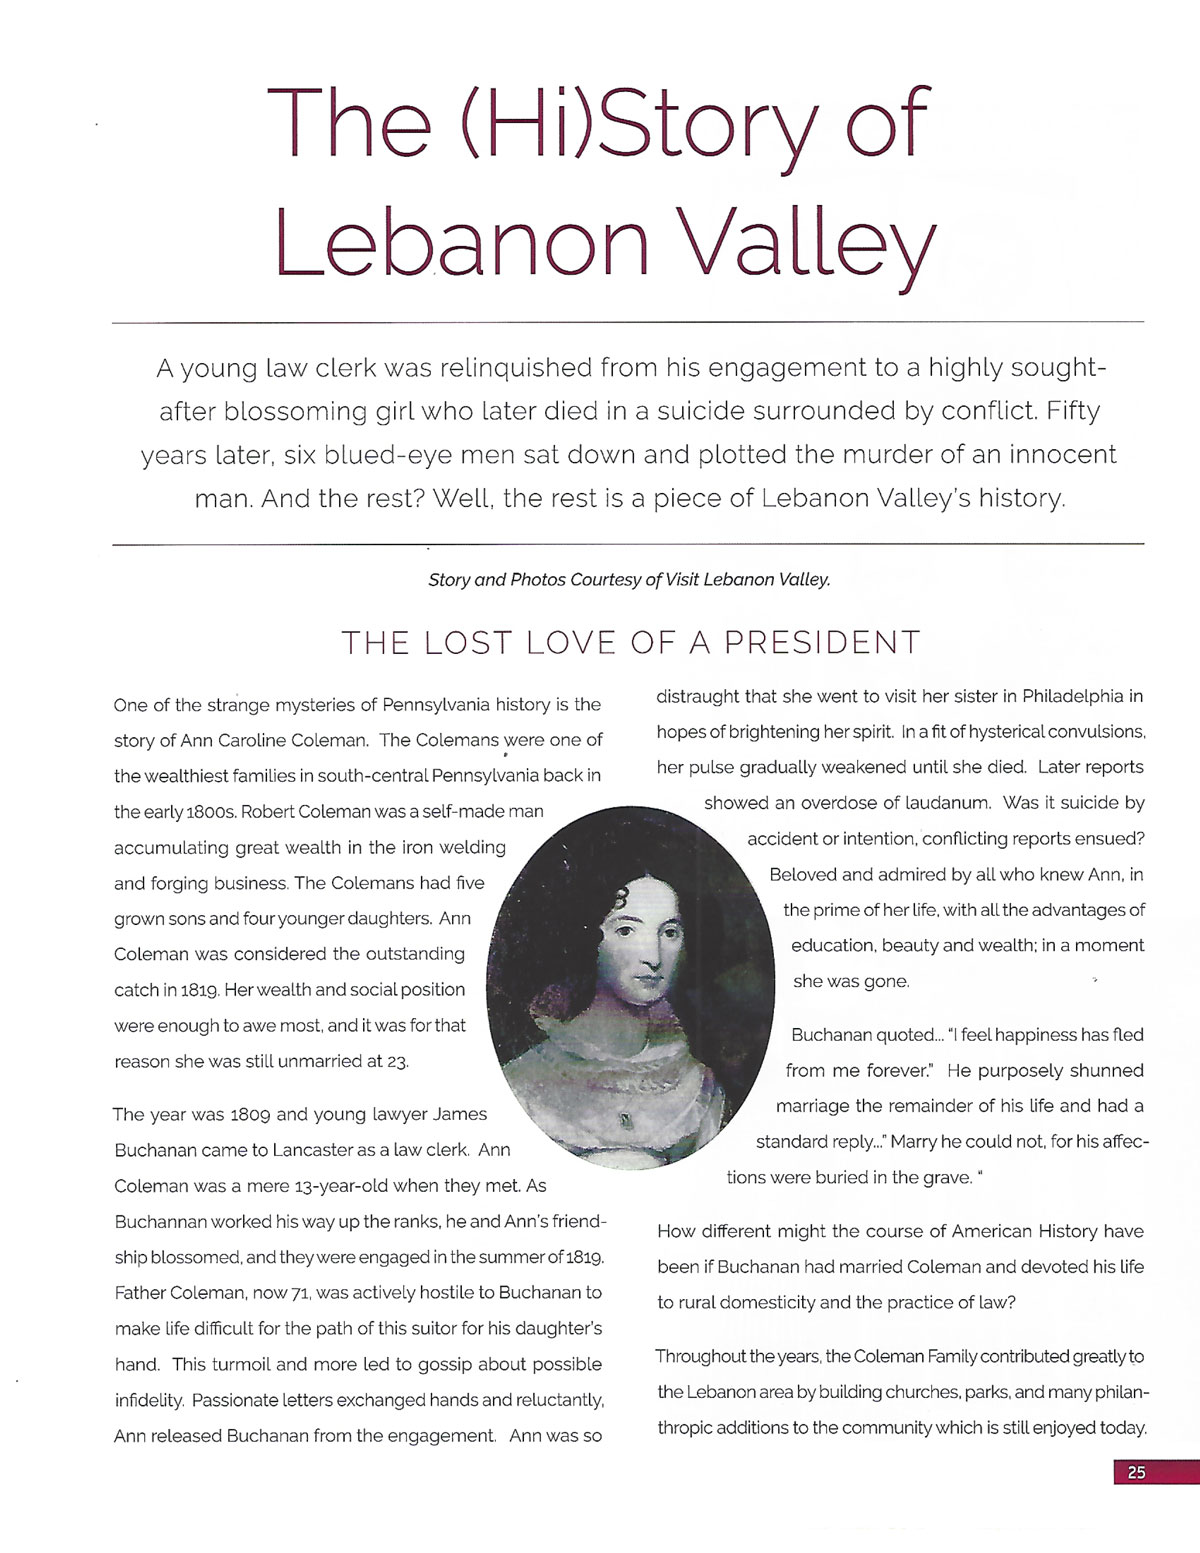 Pinpoint: Pennsylvania Article Featuring the story of James Buchanan and Ann Coleman | Visit Lebanon Valley